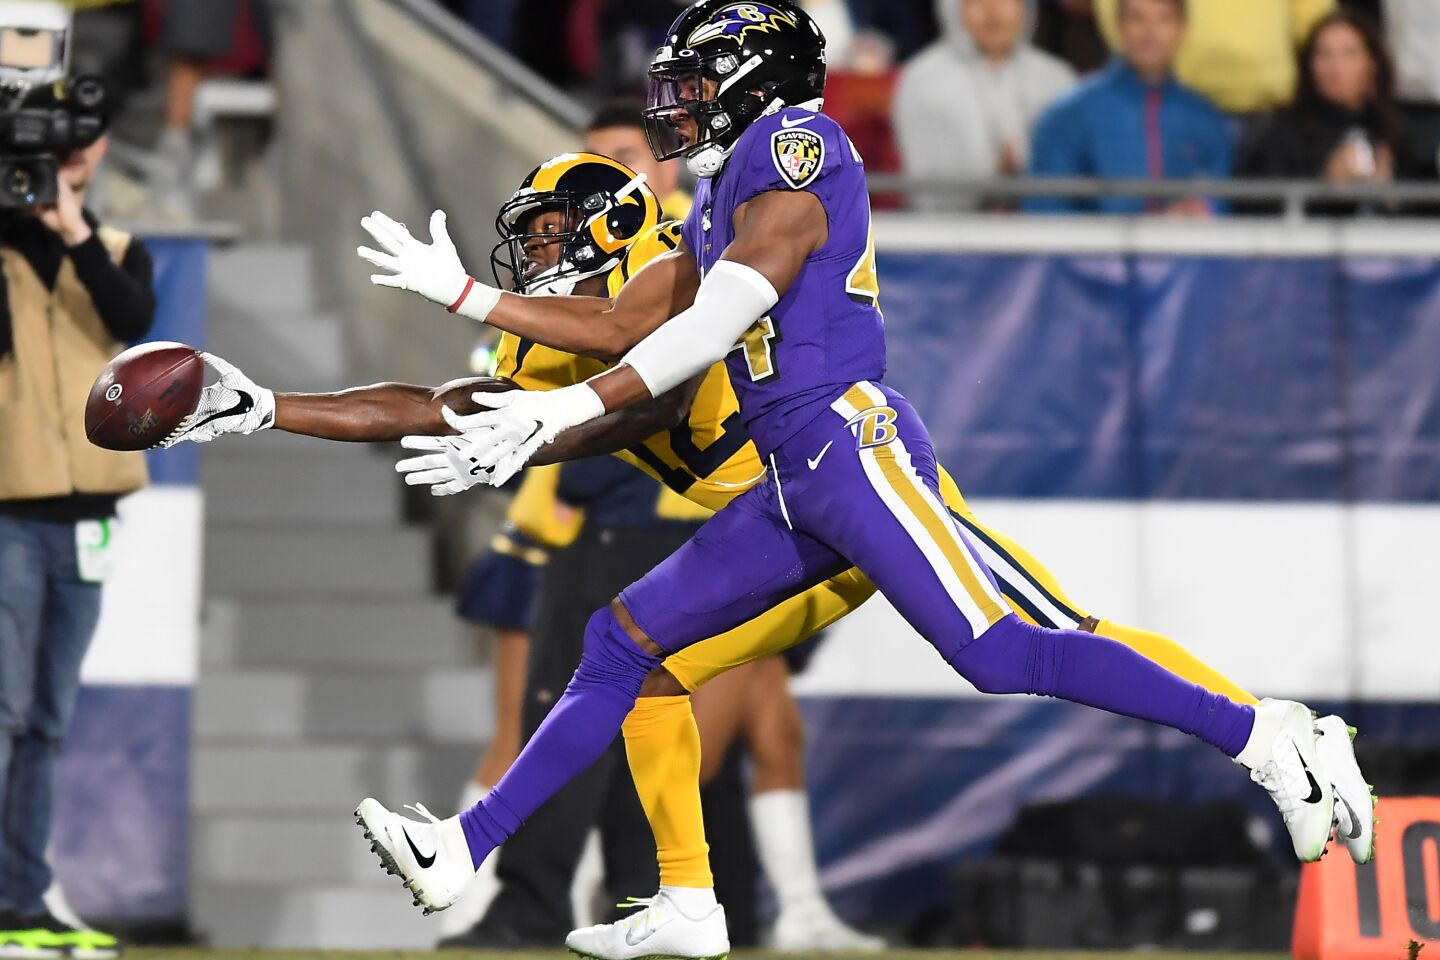 Rams receiver Robert Woods can't make the catch in front of Ravens cornerback Marlon Humphrey during the second quarter of a game Nov. 25 at the Coliseum.